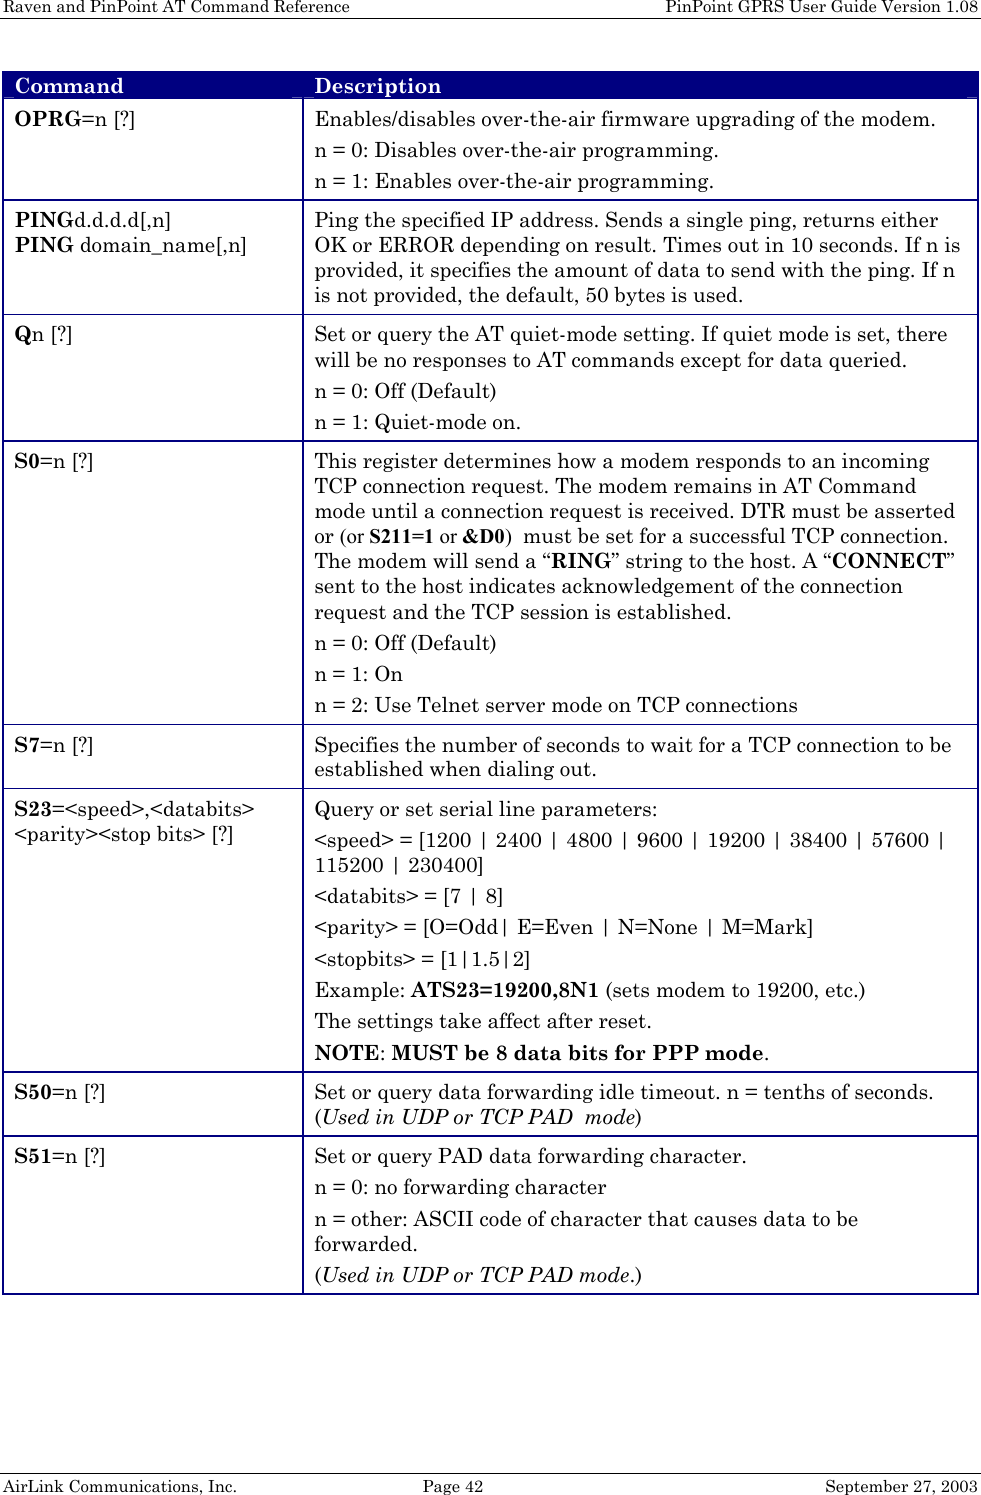 Raven and PinPoint AT Command Reference    PinPoint GPRS User Guide Version 1.08 AirLink Communications, Inc.  Page 42  September 27, 2003 Command Description OPRG=n [?] Enables/disables over-the-air firmware upgrading of the modem. n = 0: Disables over-the-air programming. n = 1: Enables over-the-air programming. PINGd.d.d.d[,n] PING domain_name[,n] Ping the specified IP address. Sends a single ping, returns either OK or ERROR depending on result. Times out in 10 seconds. If n is provided, it specifies the amount of data to send with the ping. If n is not provided, the default, 50 bytes is used. Qn [?] Set or query the AT quiet-mode setting. If quiet mode is set, there will be no responses to AT commands except for data queried. n = 0: Off (Default) n = 1: Quiet-mode on. S0=n [?] This register determines how a modem responds to an incoming TCP connection request. The modem remains in AT Command mode until a connection request is received. DTR must be asserted or (or S211=1 or &amp;D0)  must be set for a successful TCP connection. The modem will send a “RING” string to the host. A “CONNECT” sent to the host indicates acknowledgement of the connection request and the TCP session is established. n = 0: Off (Default) n = 1: On n = 2: Use Telnet server mode on TCP connections S7=n [?] Specifies the number of seconds to wait for a TCP connection to be established when dialing out. S23=&lt;speed&gt;,&lt;databits&gt; &lt;parity&gt;&lt;stop bits&gt; [?] Query or set serial line parameters: &lt;speed&gt; = [1200 | 2400 | 4800 | 9600 | 19200 | 38400 | 57600 | 115200 | 230400]  &lt;databits&gt; = [7 | 8] &lt;parity&gt; = [O=Odd| E=Even | N=None | M=Mark] &lt;stopbits&gt; = [1|1.5|2] Example: ATS23=19200,8N1 (sets modem to 19200, etc.) The settings take affect after reset. NOTE: MUST be 8 data bits for PPP mode. S50=n [?] Set or query data forwarding idle timeout. n = tenths of seconds. (Used in UDP or TCP PAD  mode) S51=n [?] Set or query PAD data forwarding character.  n = 0: no forwarding character n = other: ASCII code of character that causes data to be forwarded. (Used in UDP or TCP PAD mode.) 